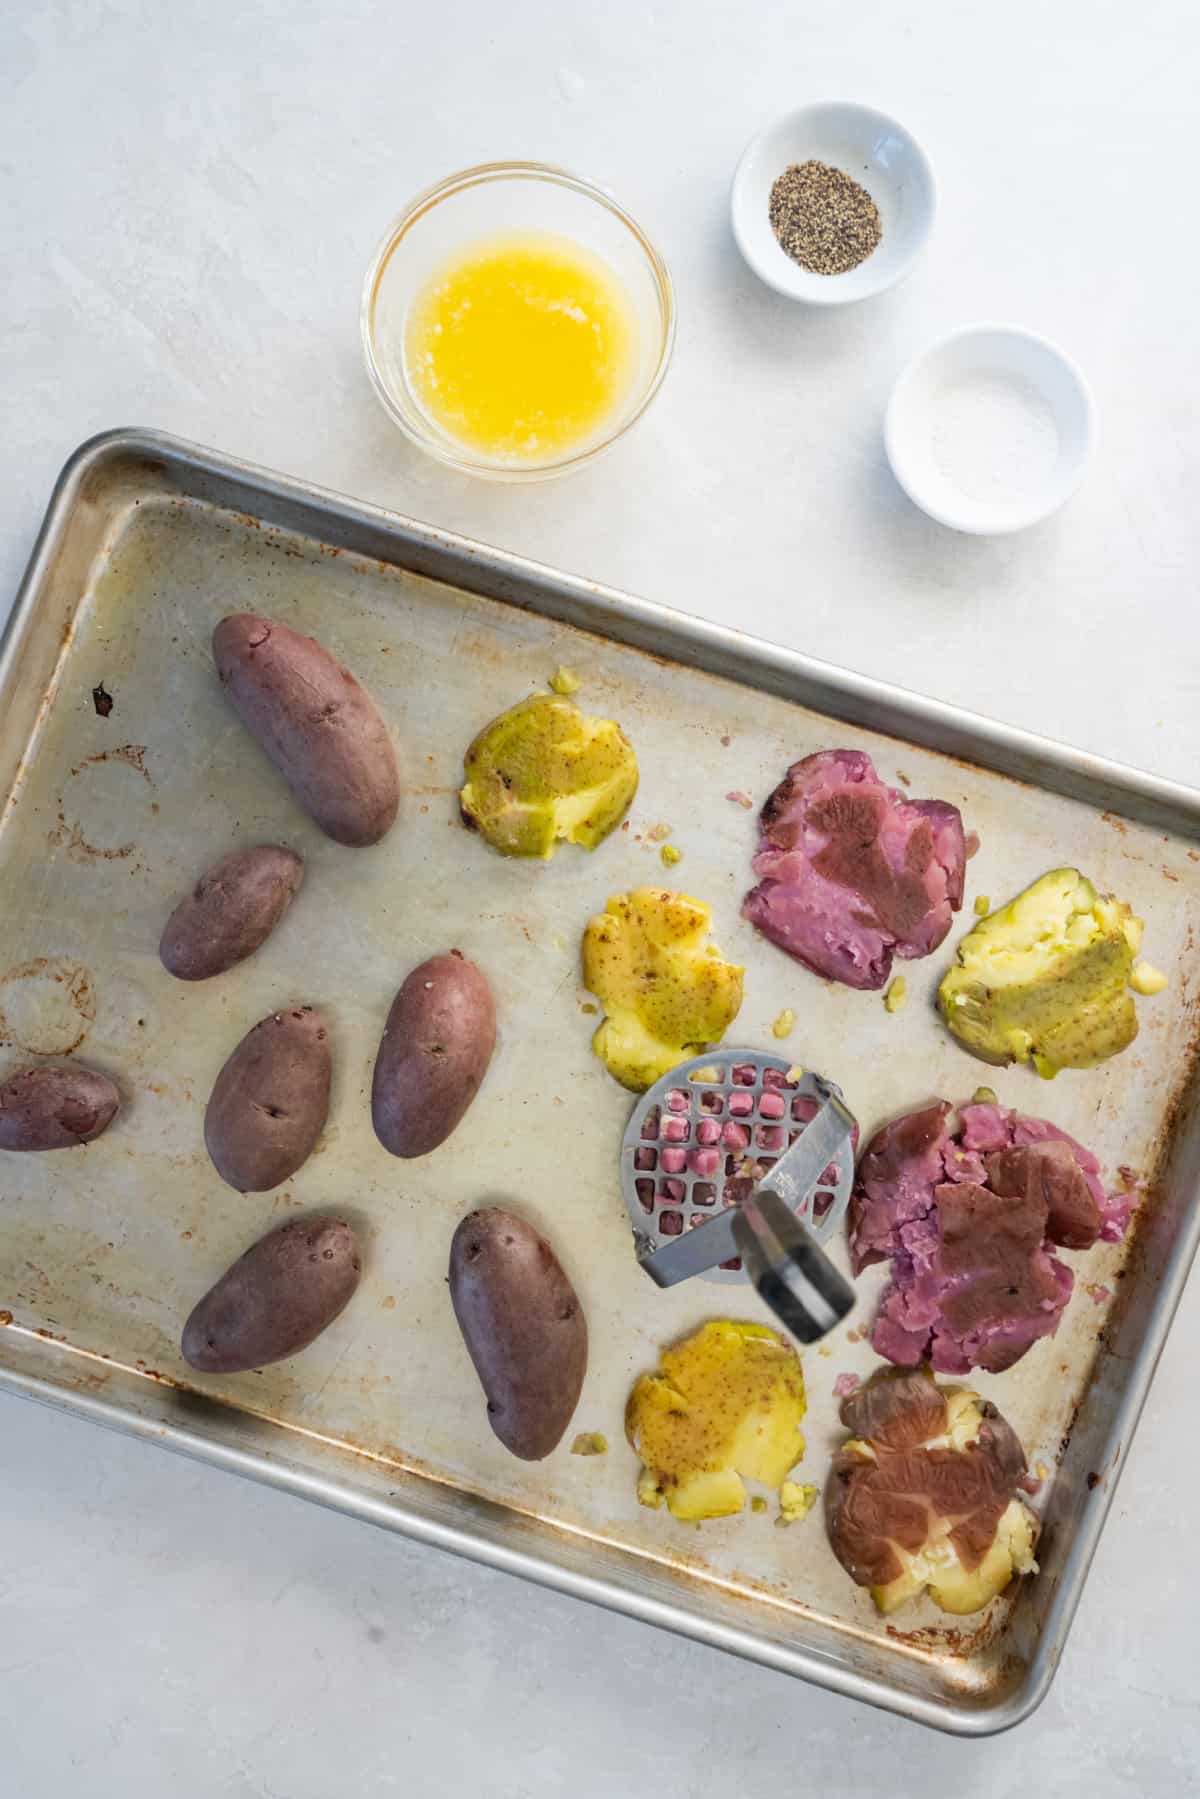 Fingerling potatoes sitting on a sheet pan with a potato mashed pressed down on one of the potatoes to smash it.